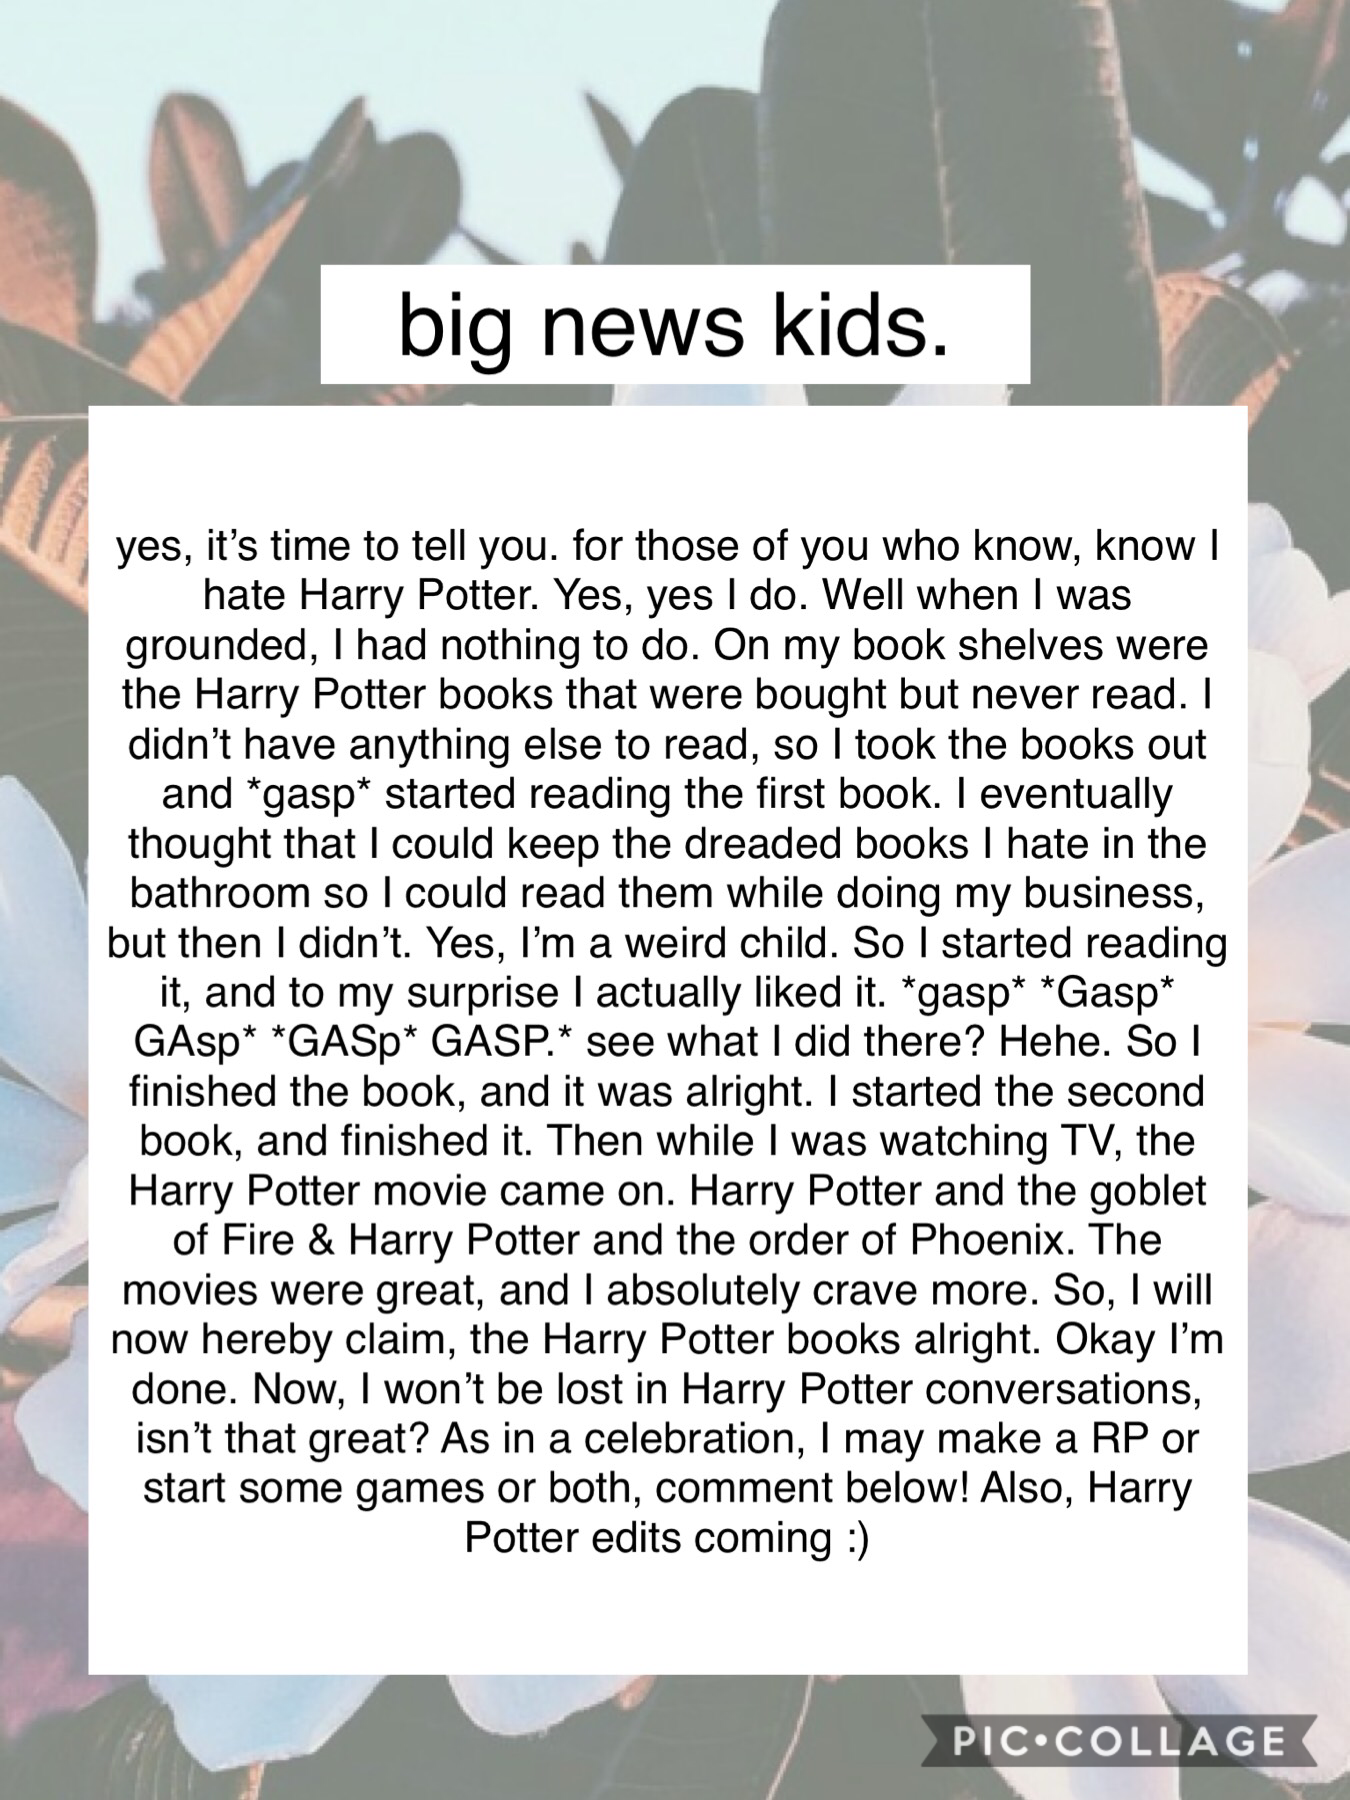 💥BIG NEWS💥 Anywho, I’m a griffindor💥 EEE, I need to get the other books soon💥 Probably gonna delete this💥 Games or RP, or both?💥I’m still a Percy Jackson fan for life, no doubt.💥
#PCONLY
#BIGNEWS?
#GRIFFINDOR
#PJFAN4LIFE
#OKIE
#BAI
#HEHE
#NEVER
#OKIE
#NOW